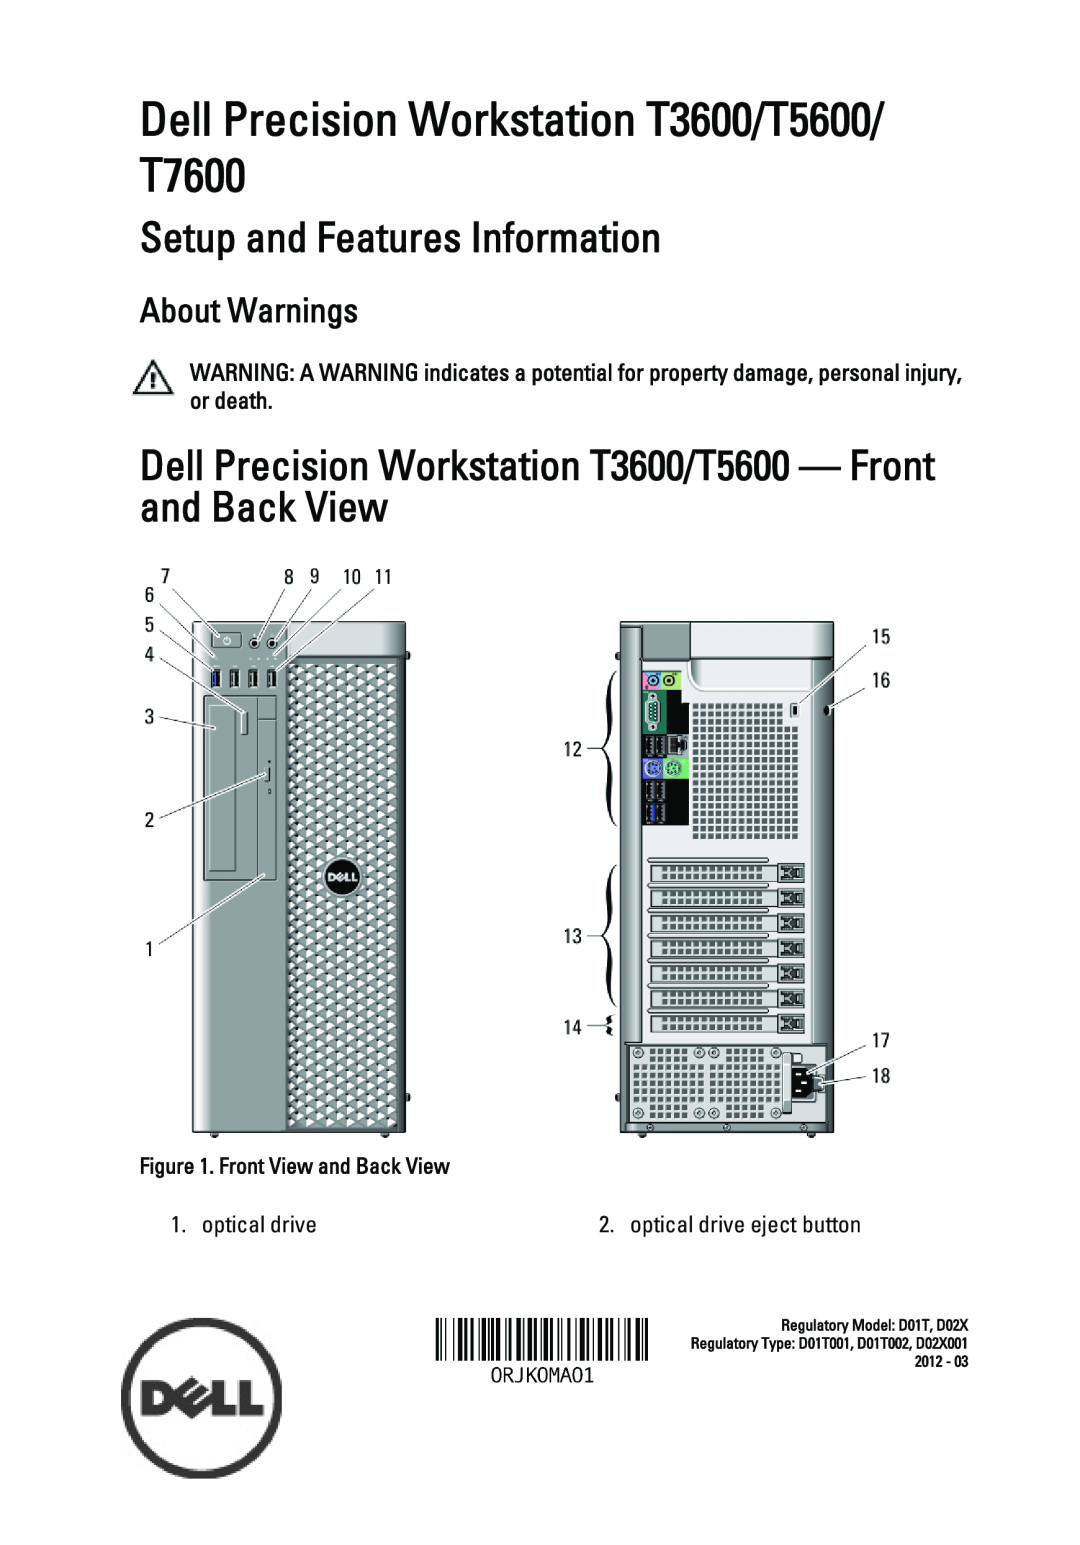 Dell t3600/t5600 manual Setup and Features Information, Dell Precision Workstation T3600/T5600 - Front and Back View, 2012 